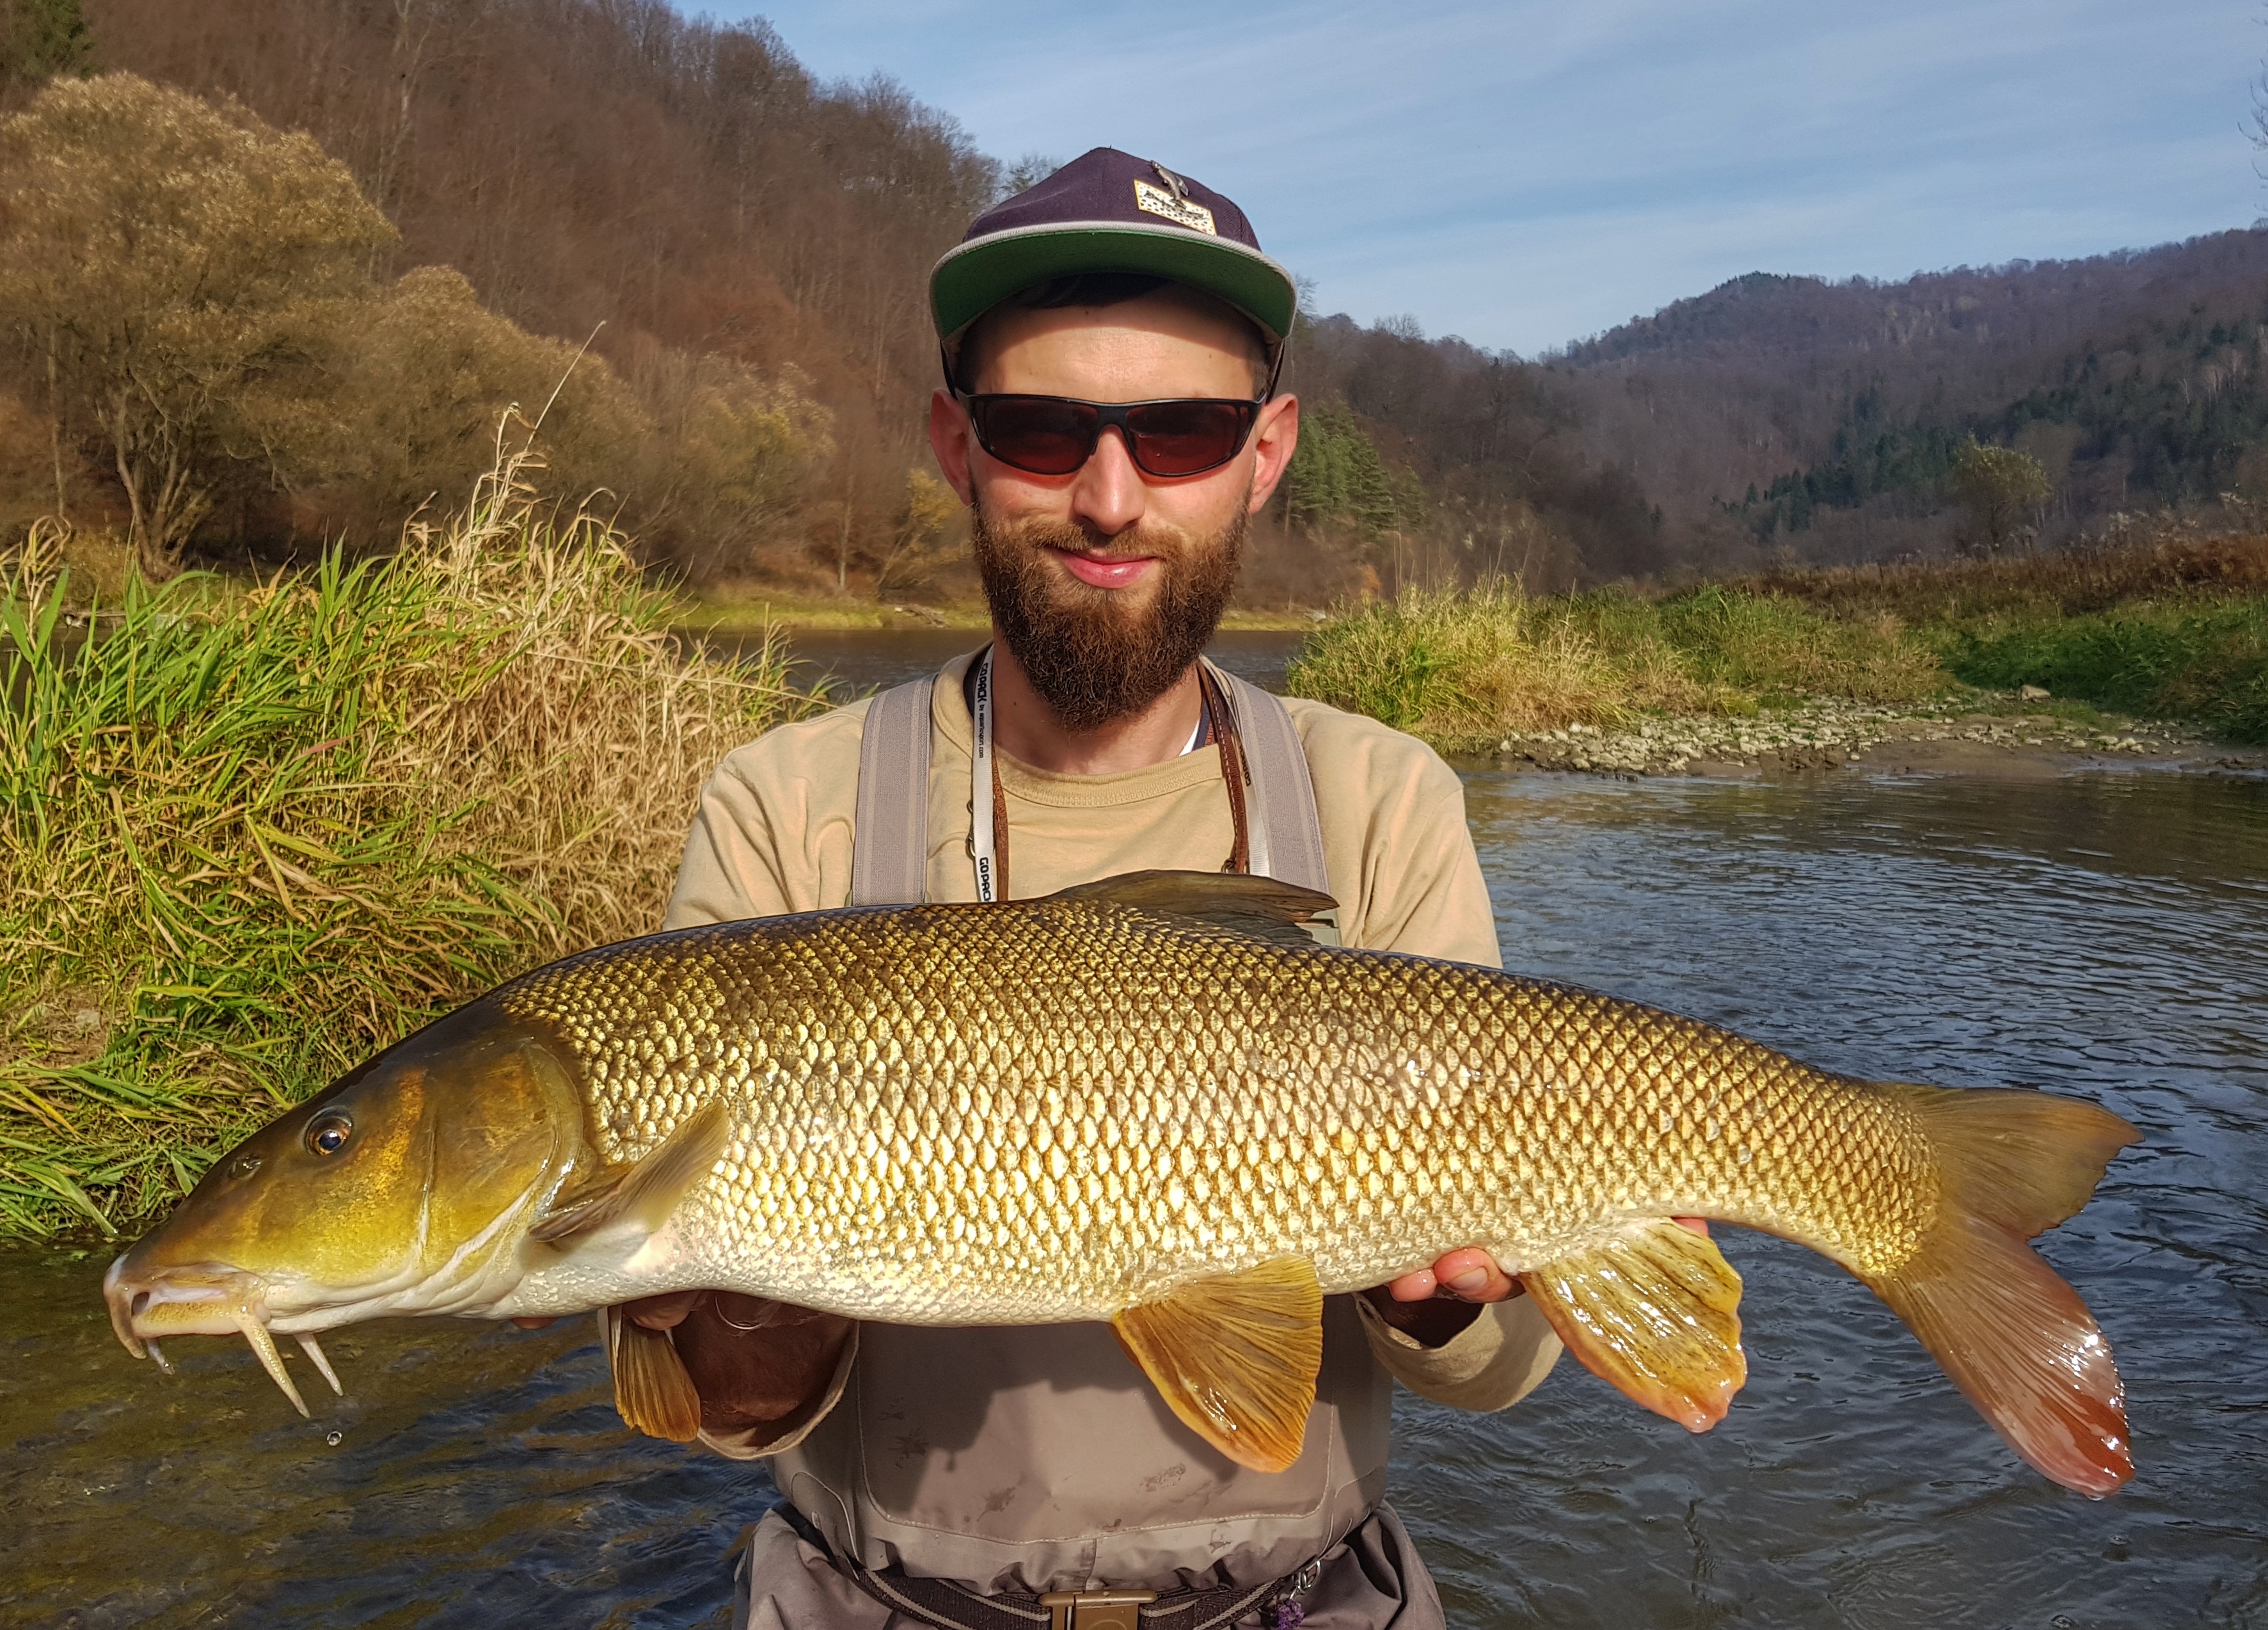 Maciek - fly fishing guide in Poland with nice fish